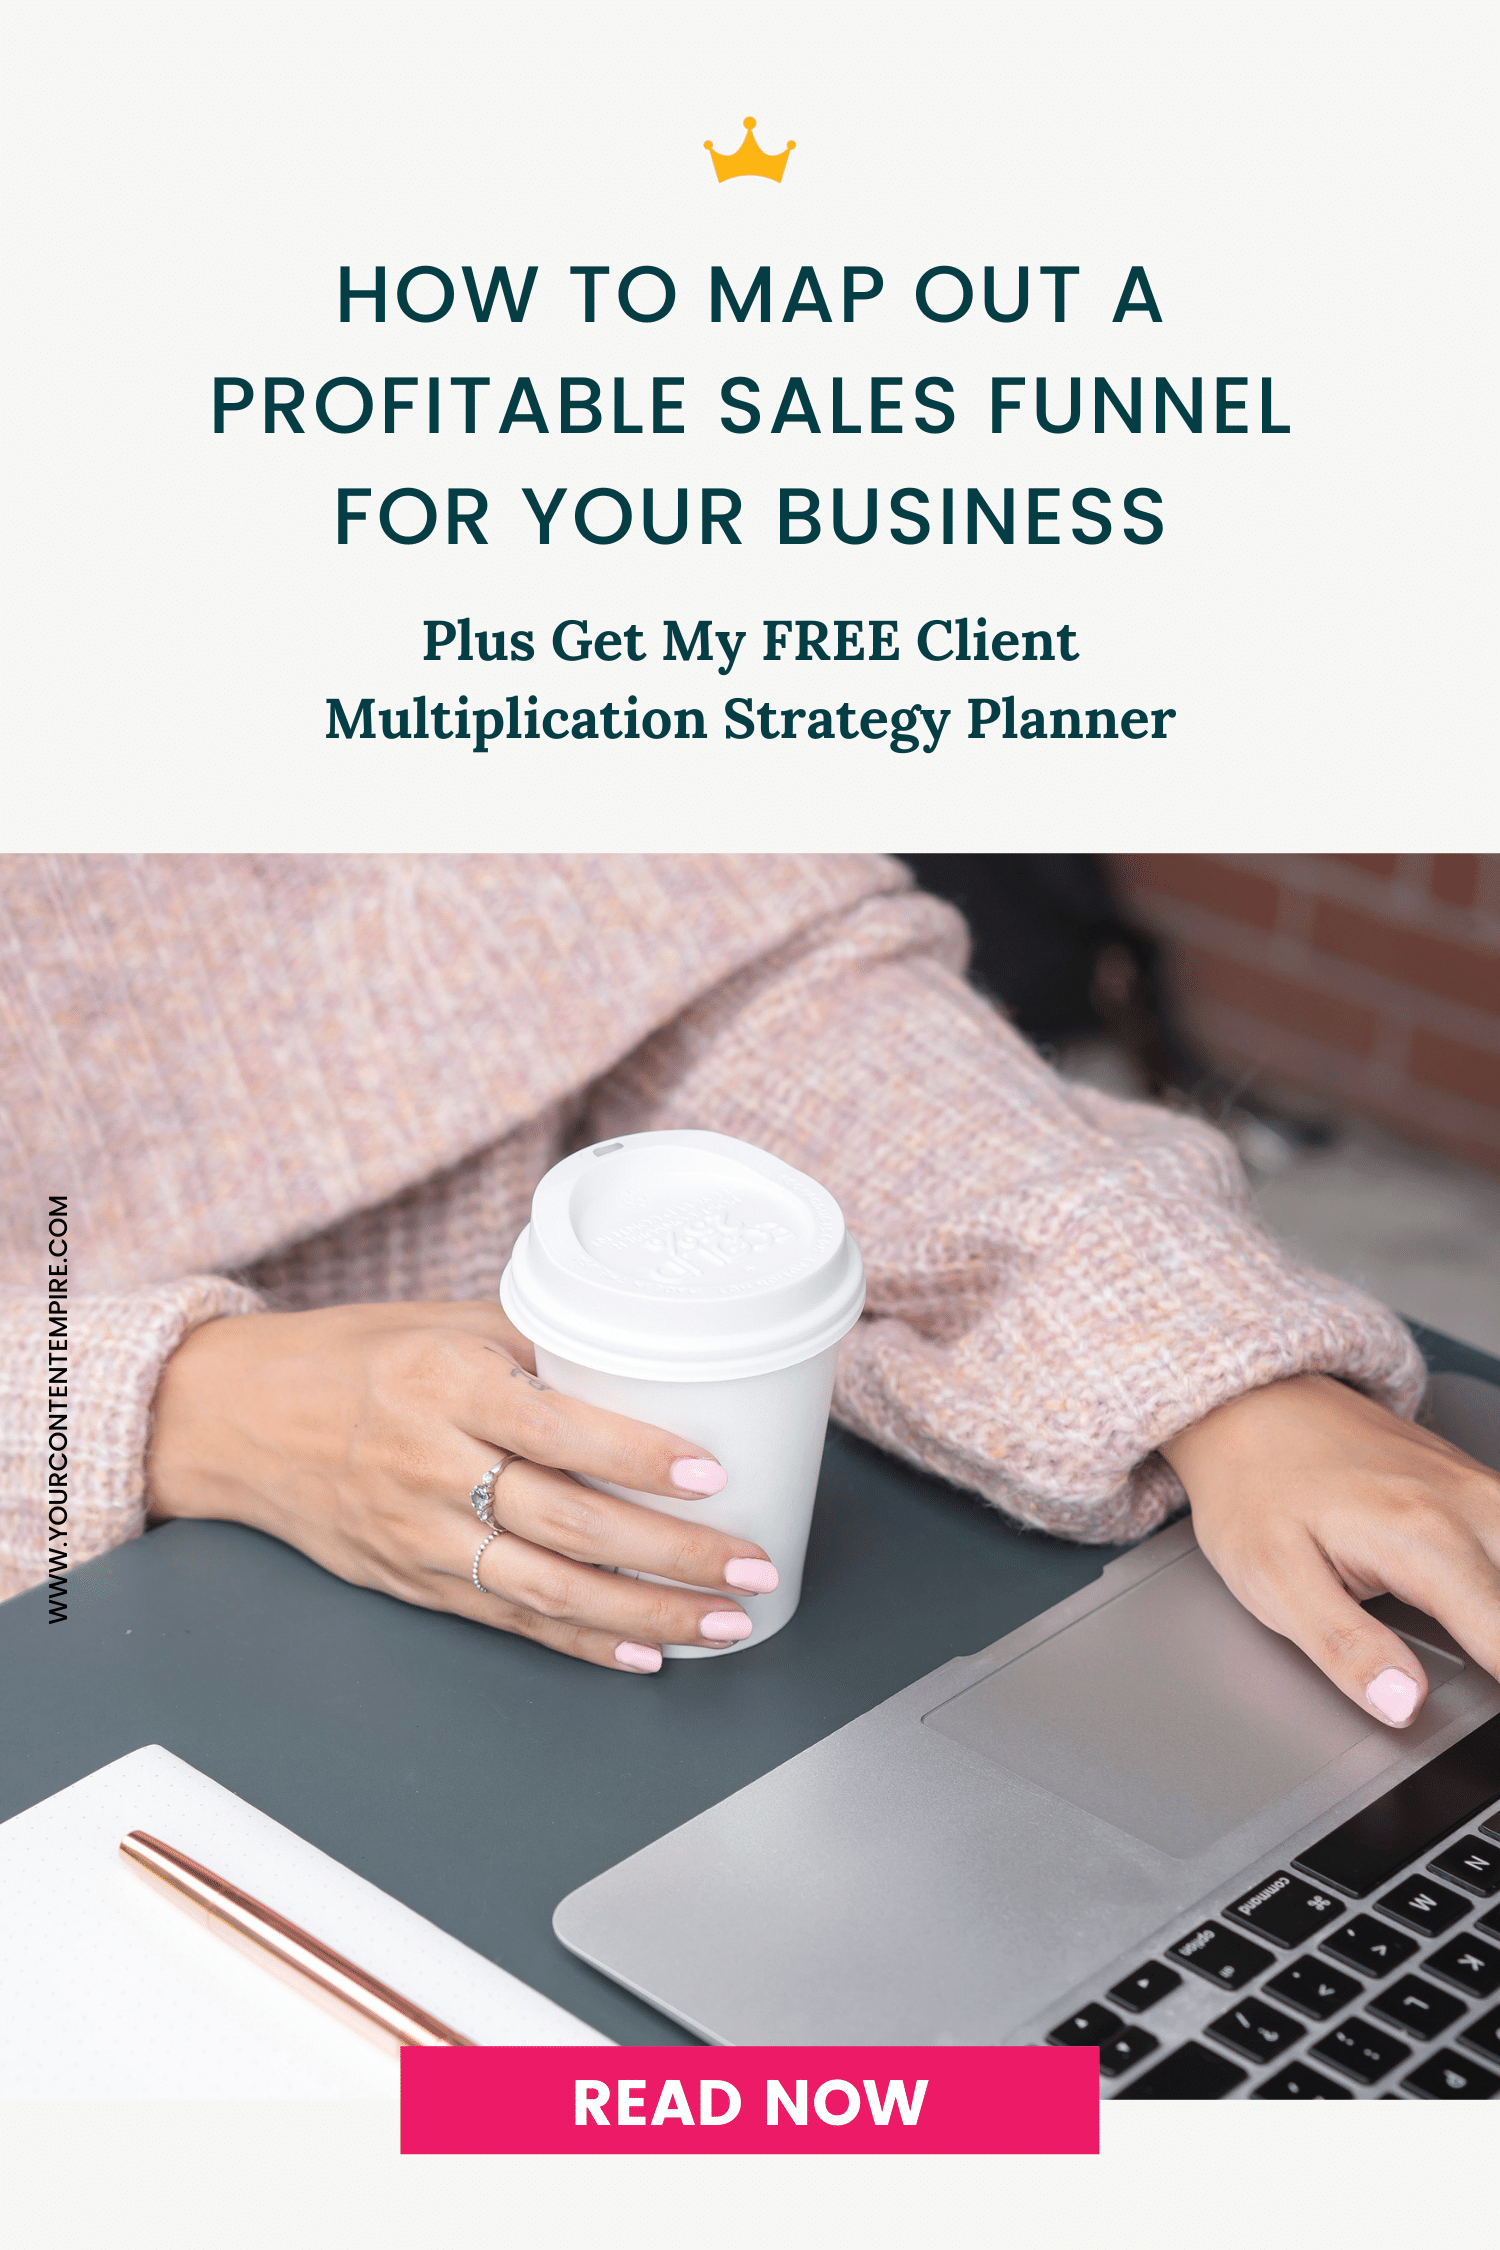 How to Map Out A Profitable Sales Funnel for Your Business